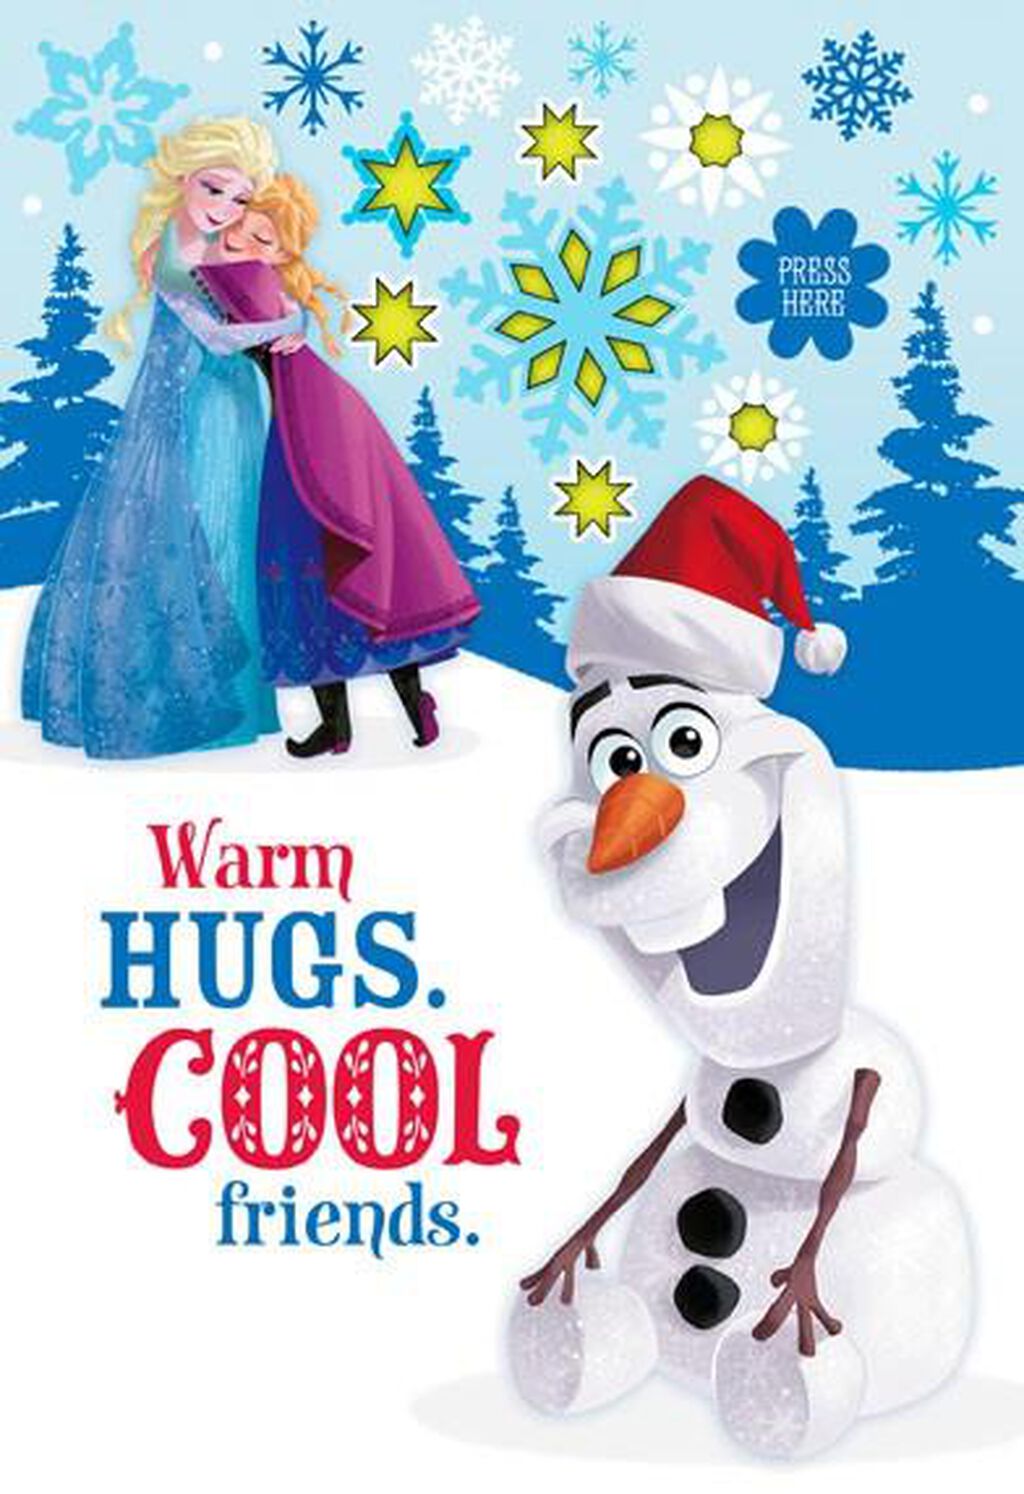 Disney Frozen Hugs and Friends with Sound and Light Christmas Card Hallmark